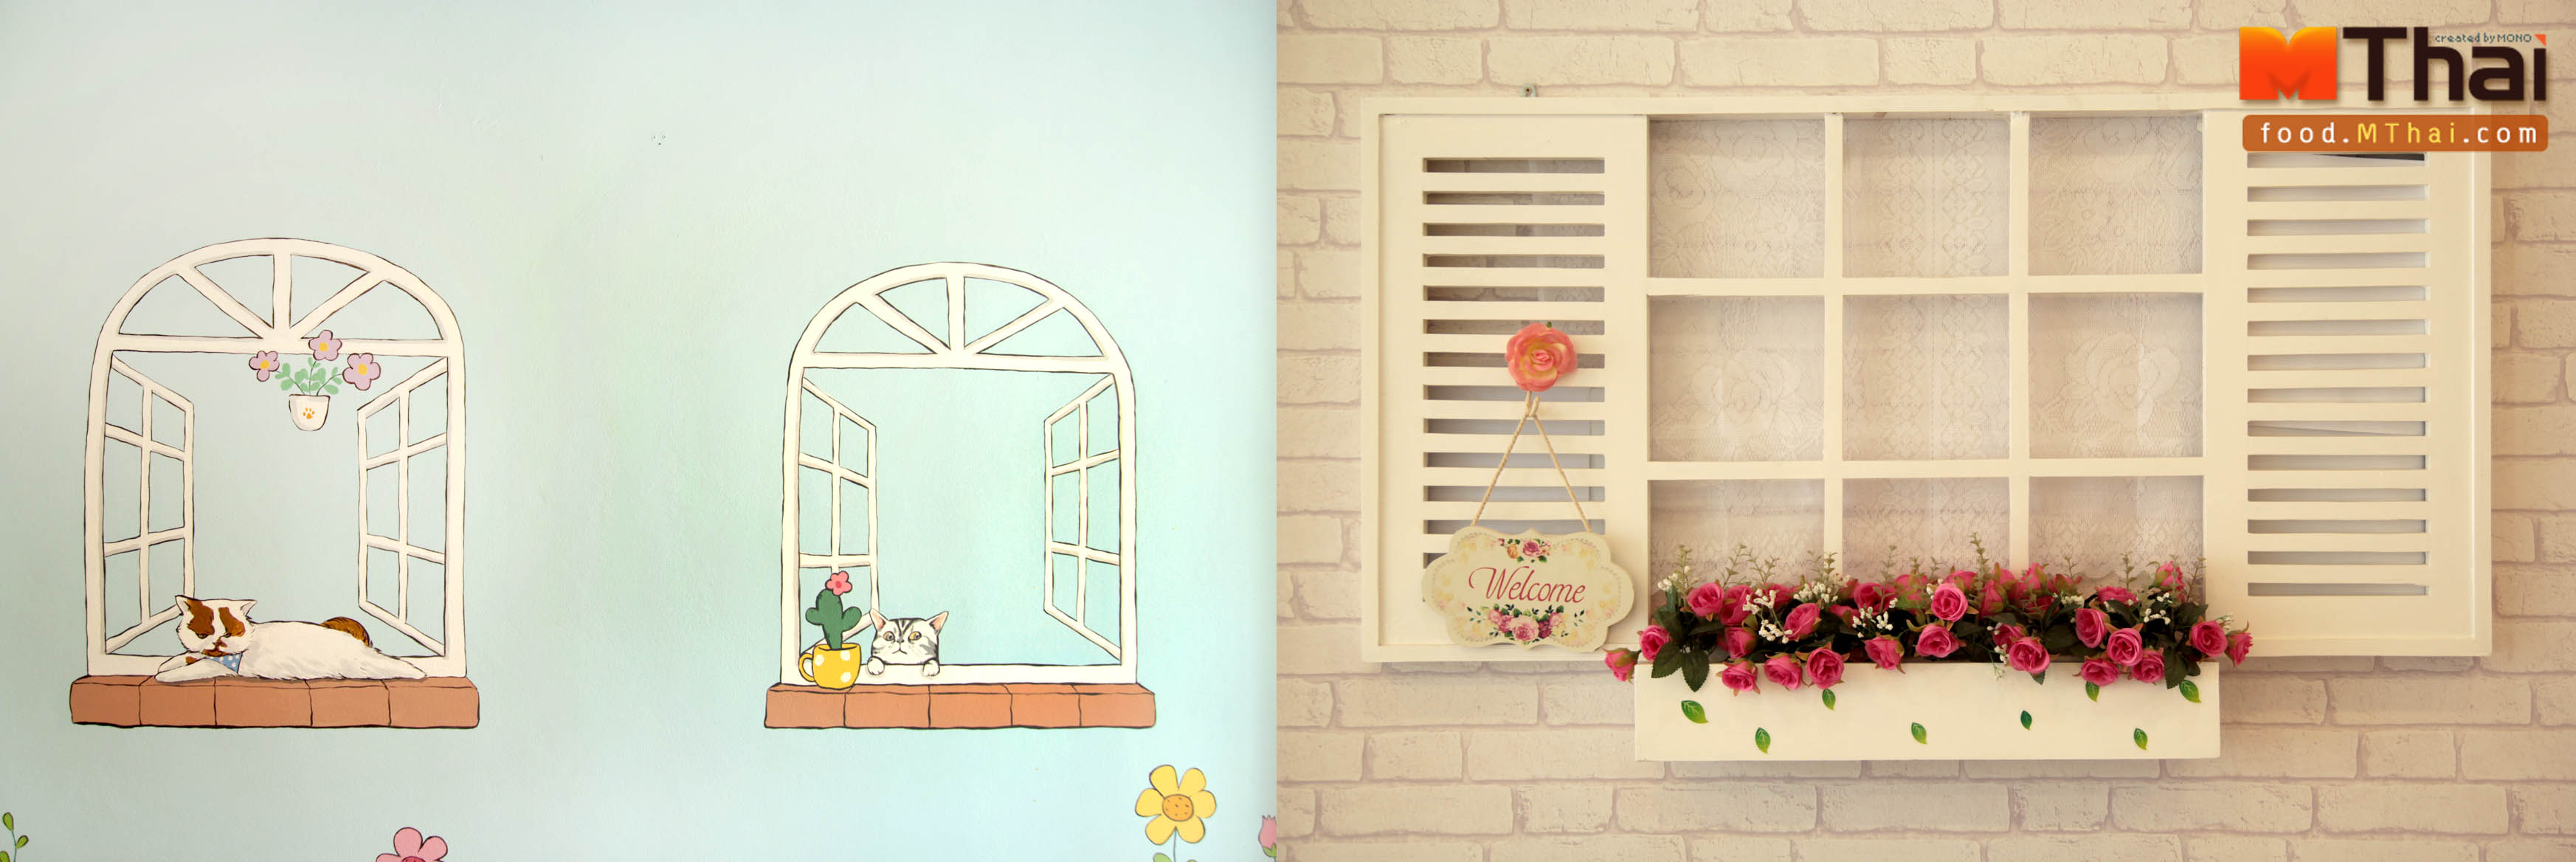 cat-cafe-wall-paint